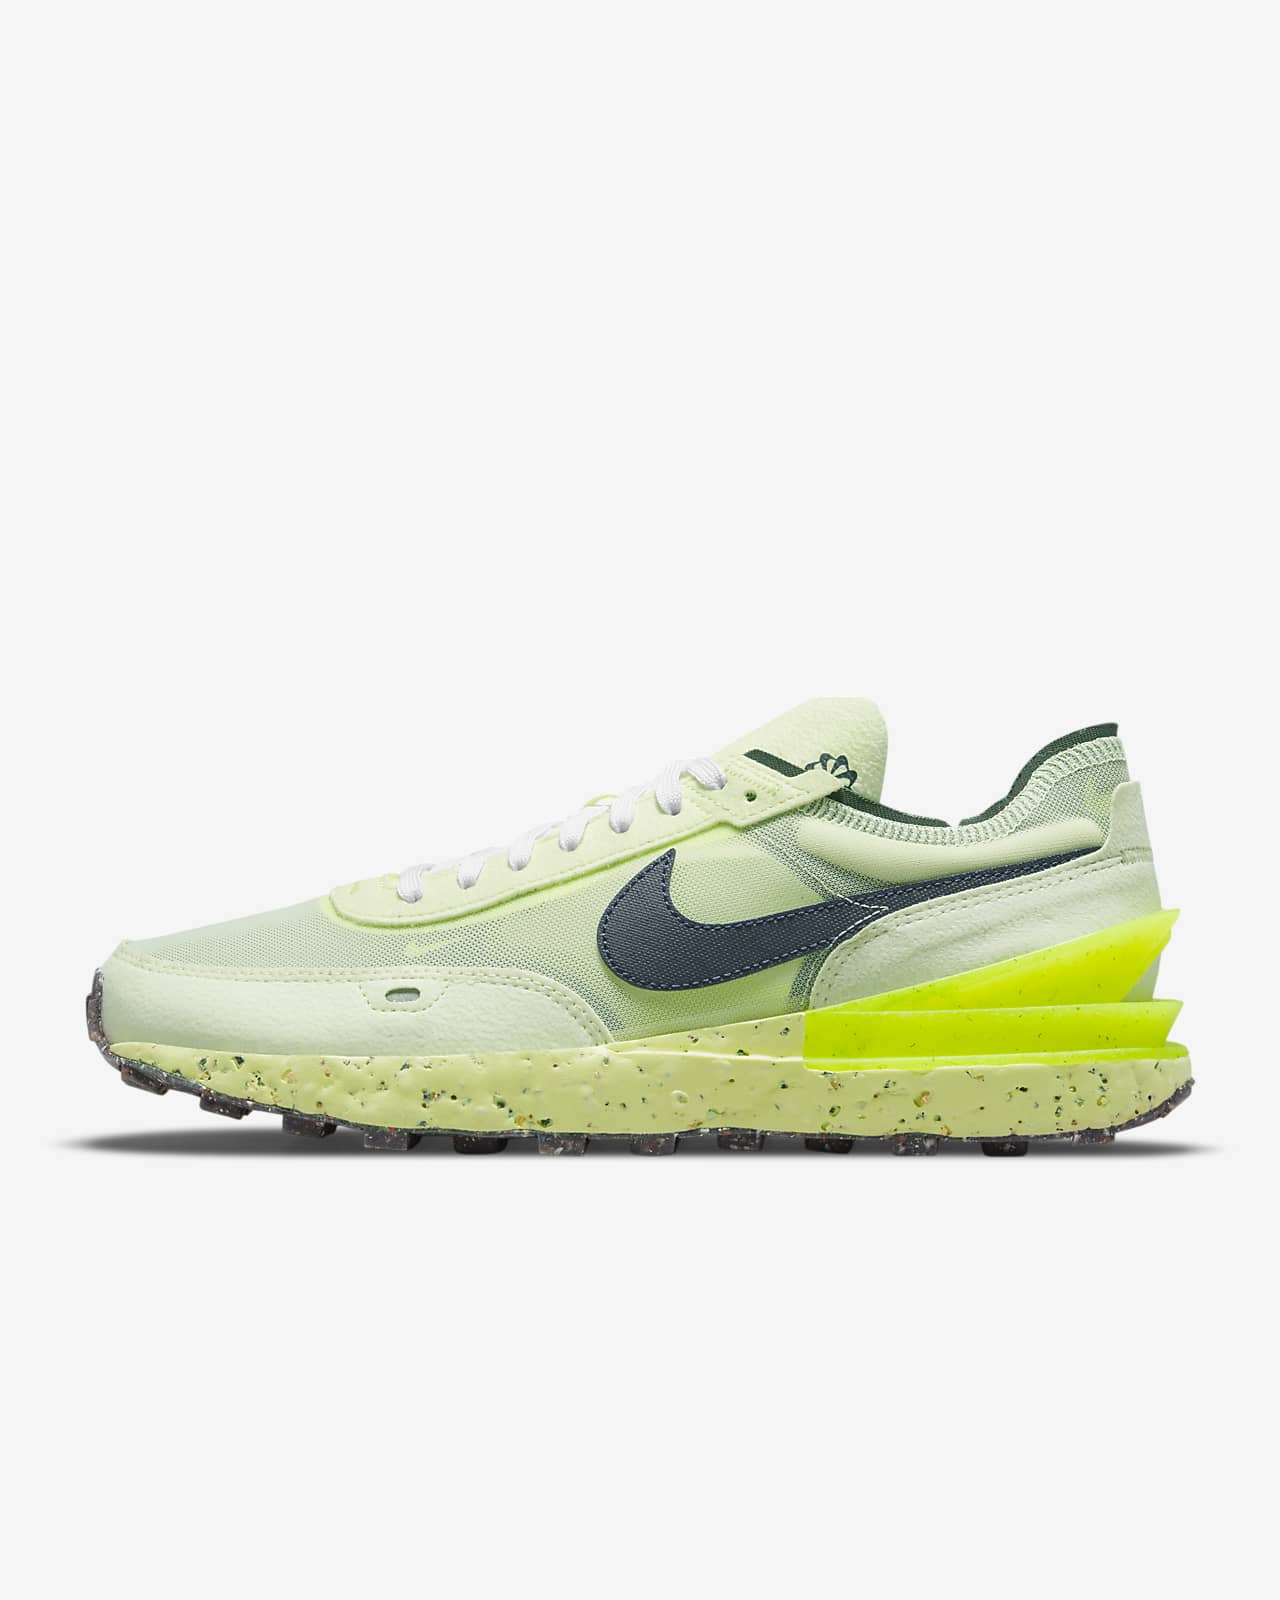 Nike Waffle One Crater ‘Lime Ice’